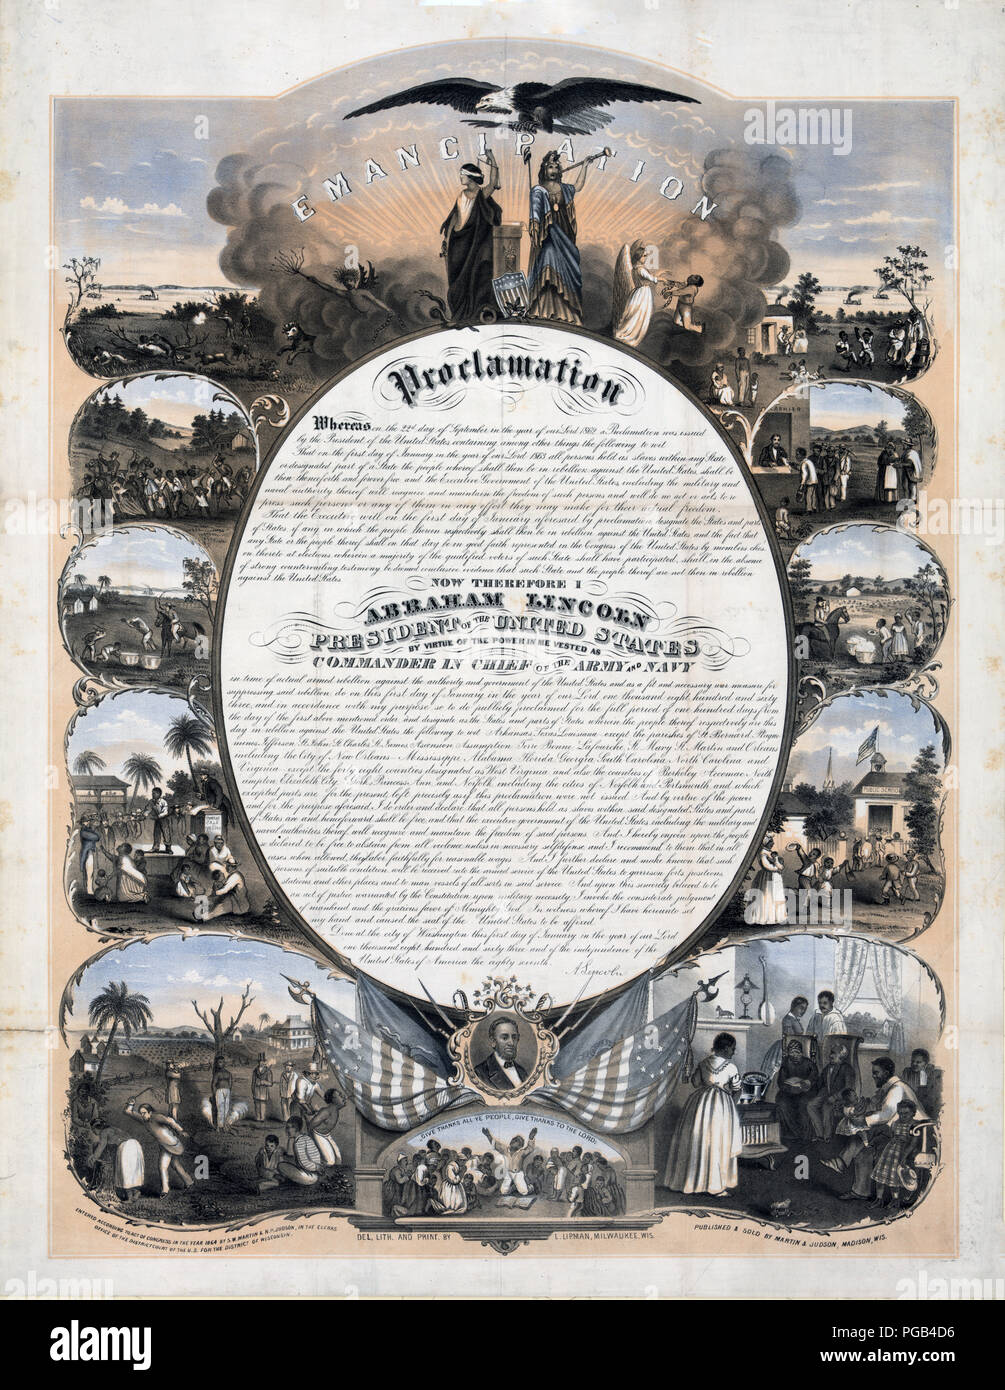 Print shows at center the text of the Emancipation Proclamation with vignettes surrounding it; on the left are scenes related to slavery and on the right are scenes showing the benefits attained through freedom; also shows Justice and Columbia at the top center beneath a bald eagle and a portrait of Abraham Lincoln at bottom center above a scene of former slaves giving thanks. Stock Photo